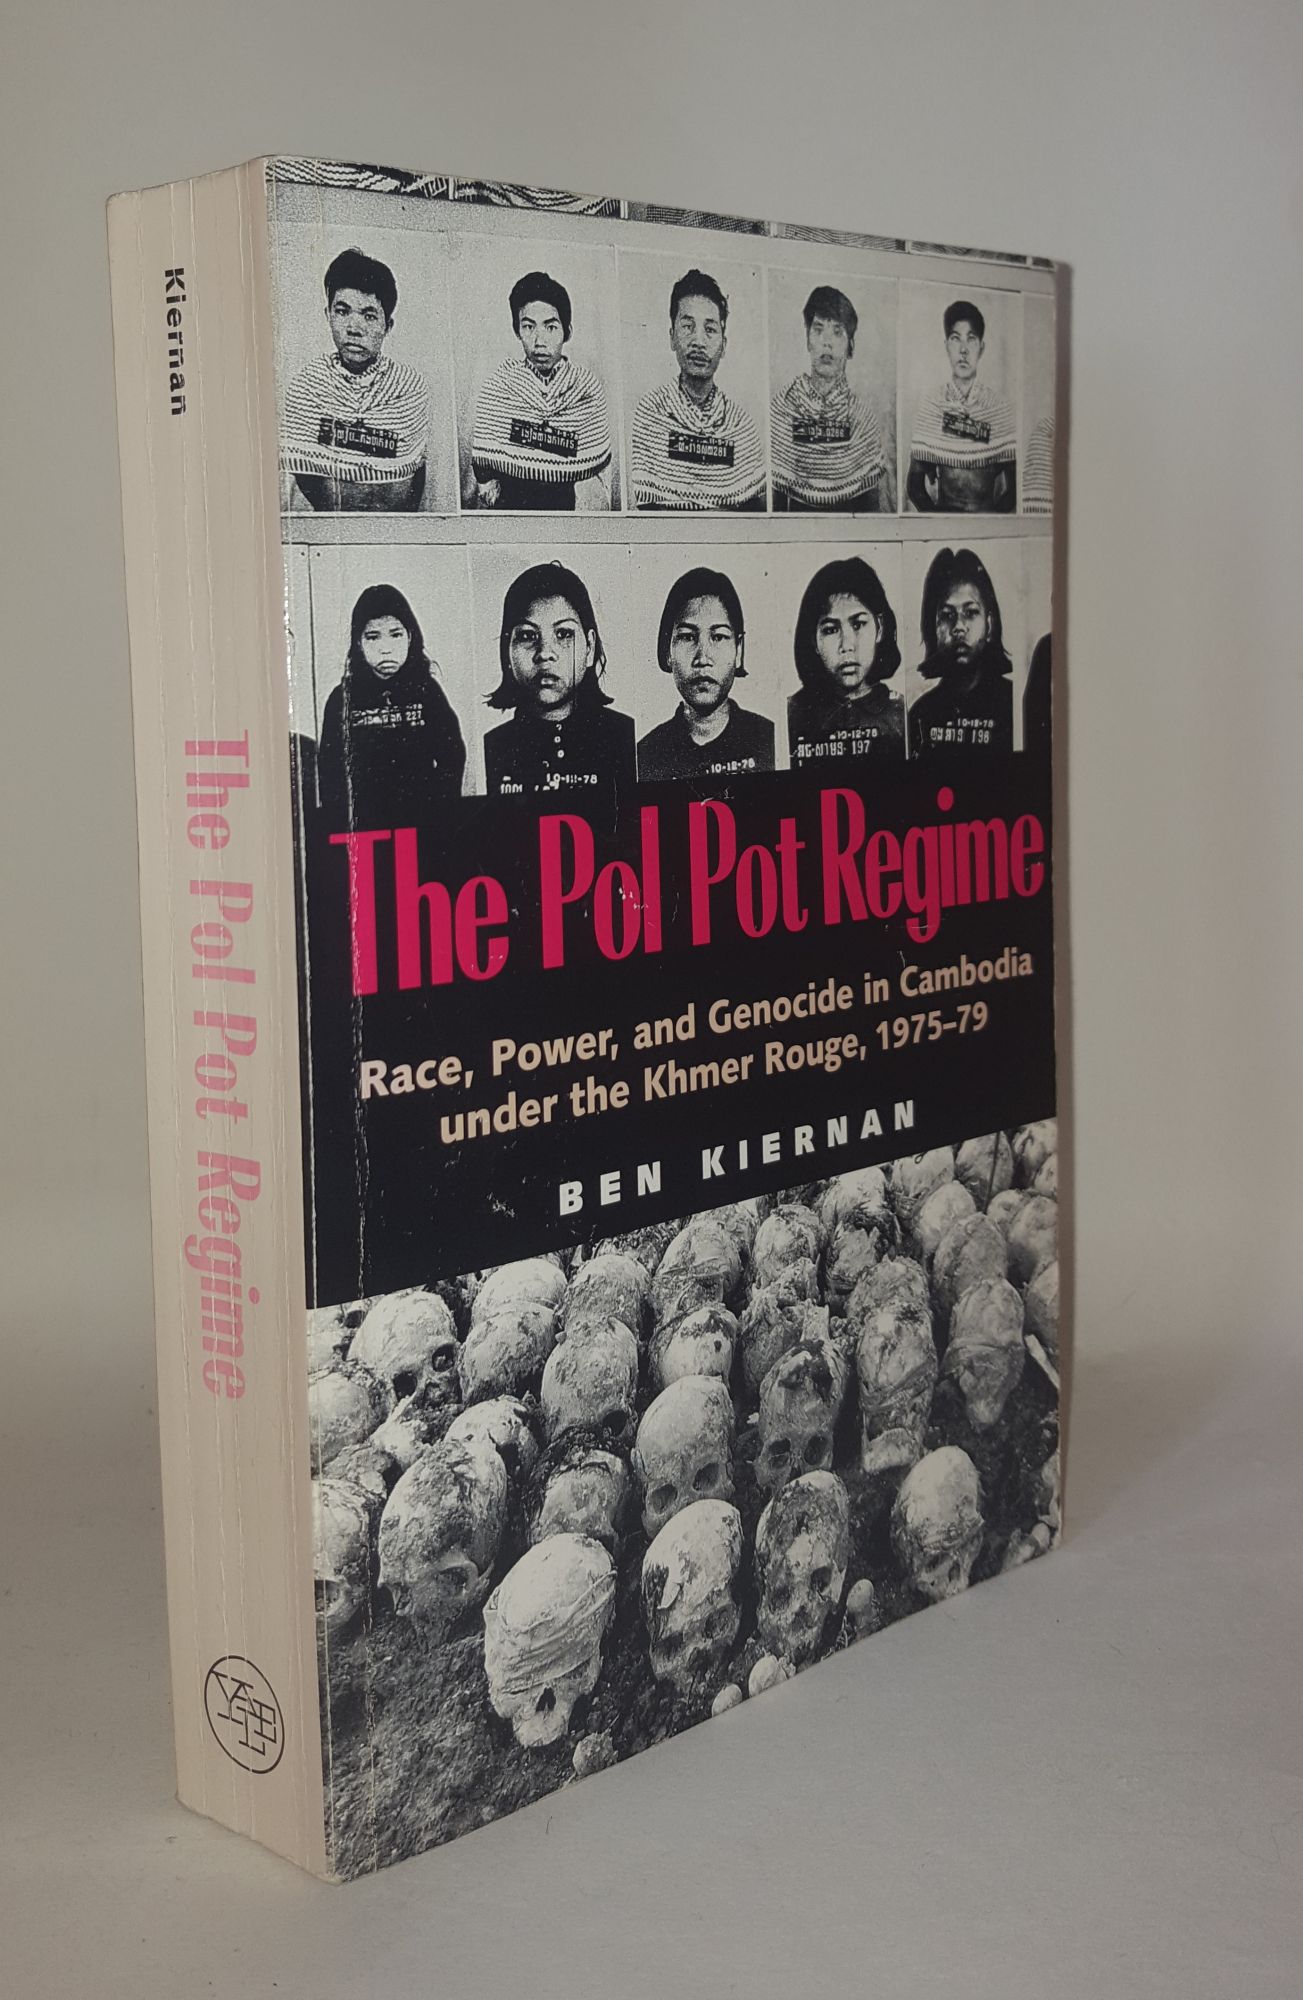 KIERNAN Ben - The Pol Pot Regime Race Power and Genocide in Cambodia Under the Khmer Rouge 1975 - 79